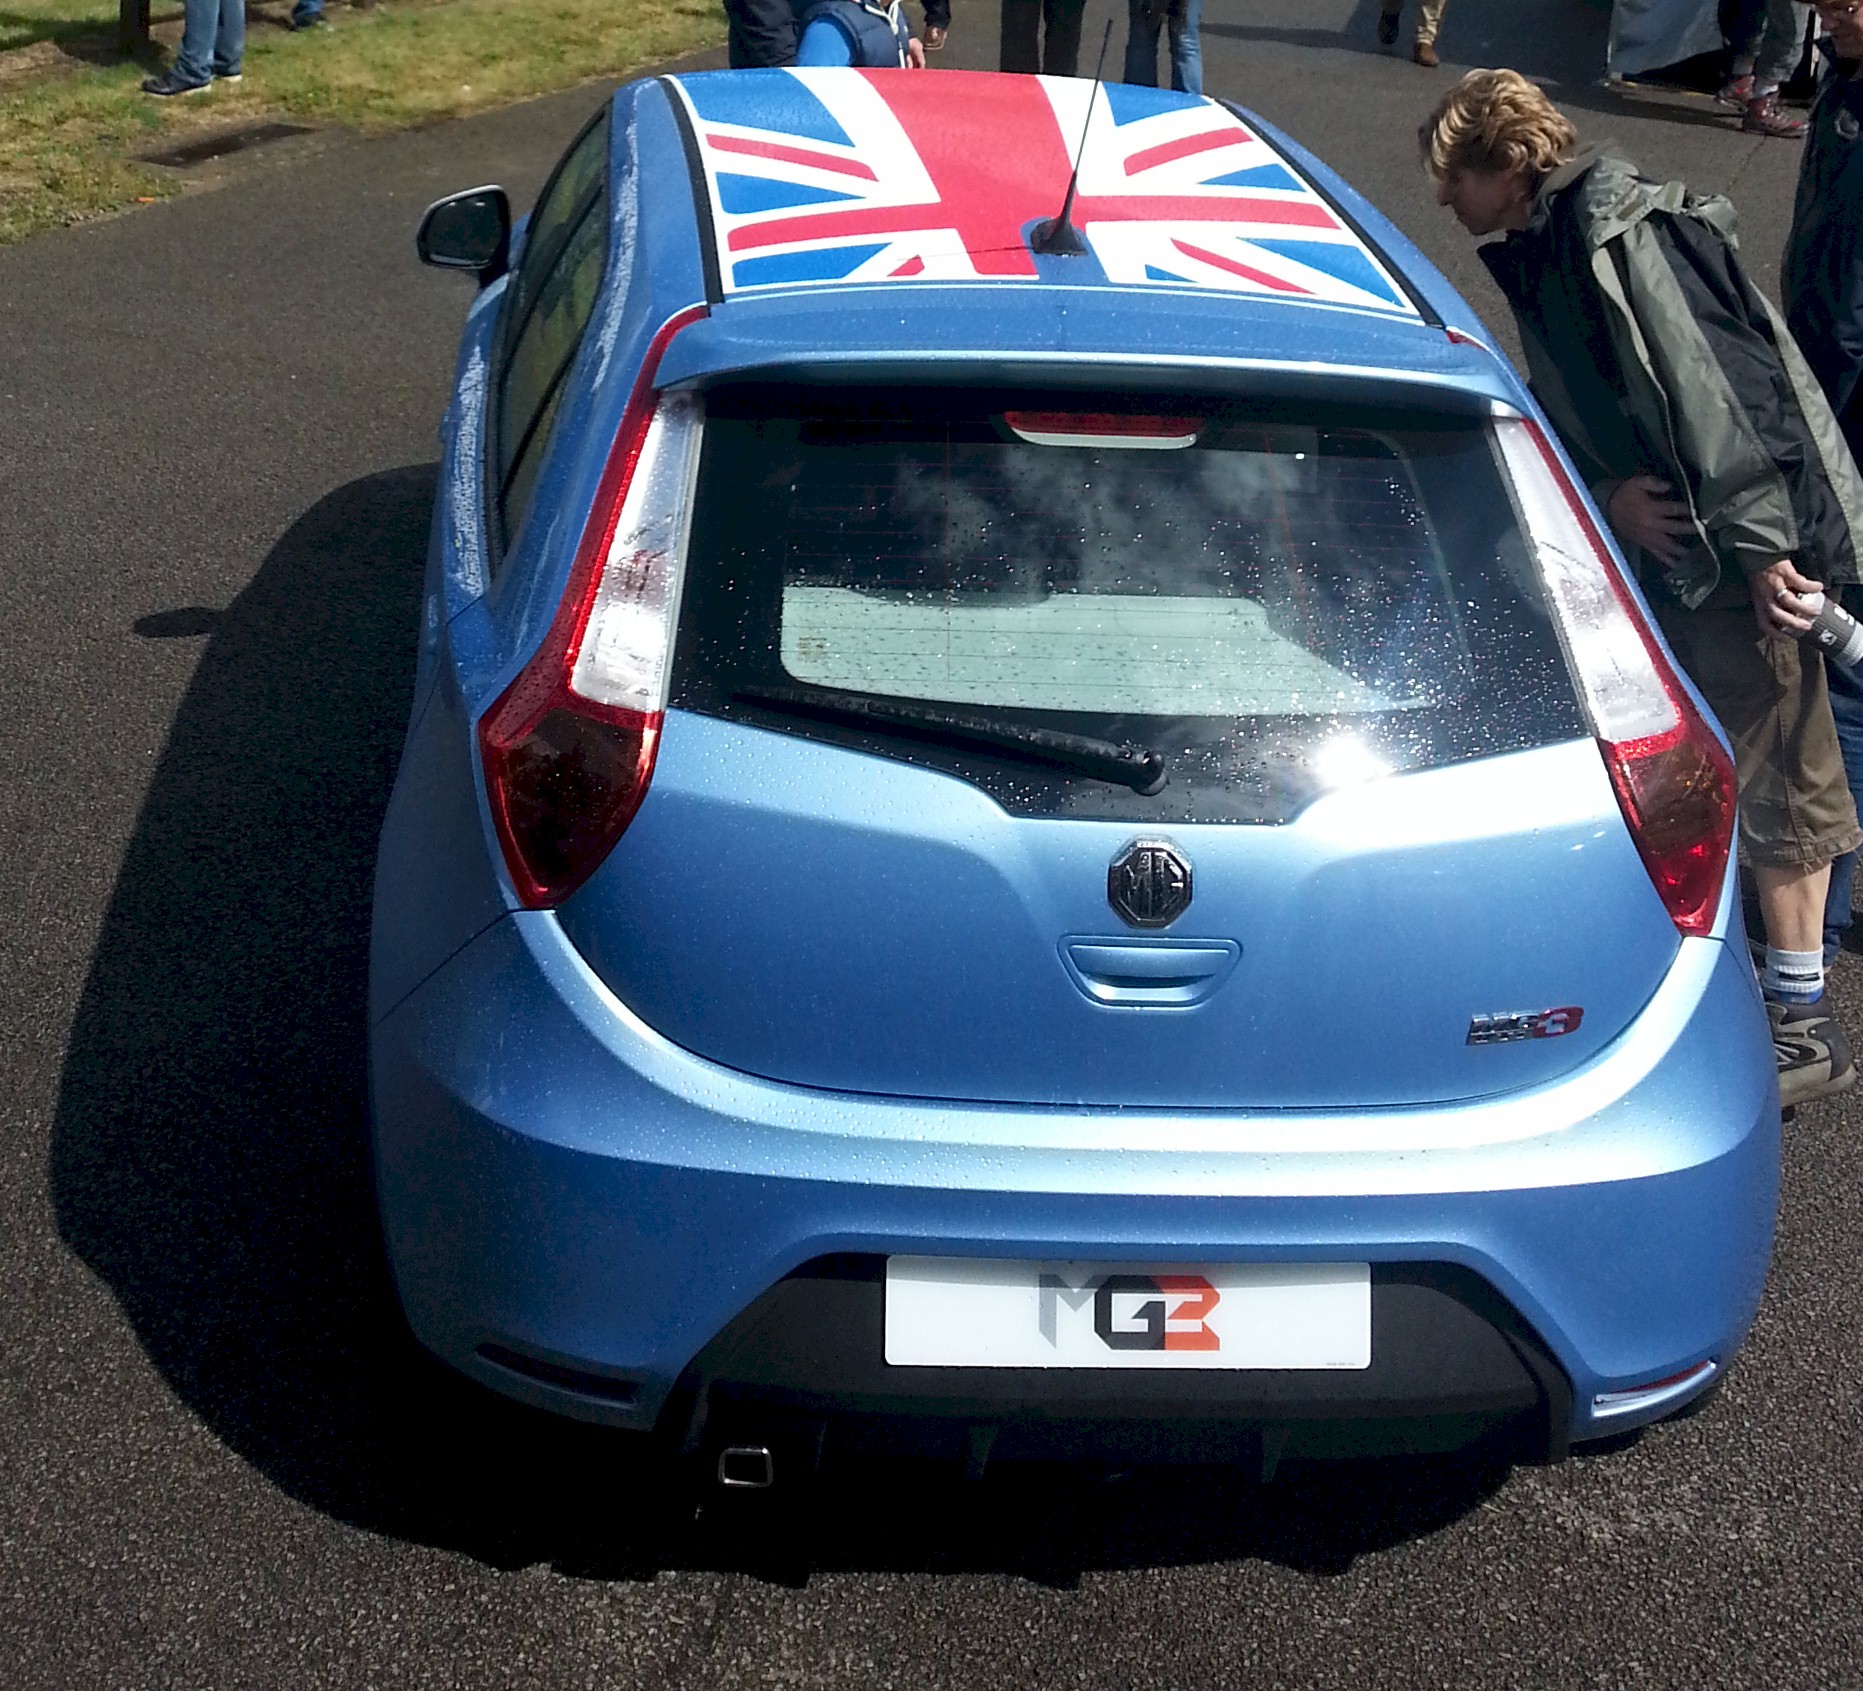 MG3 rear and roof